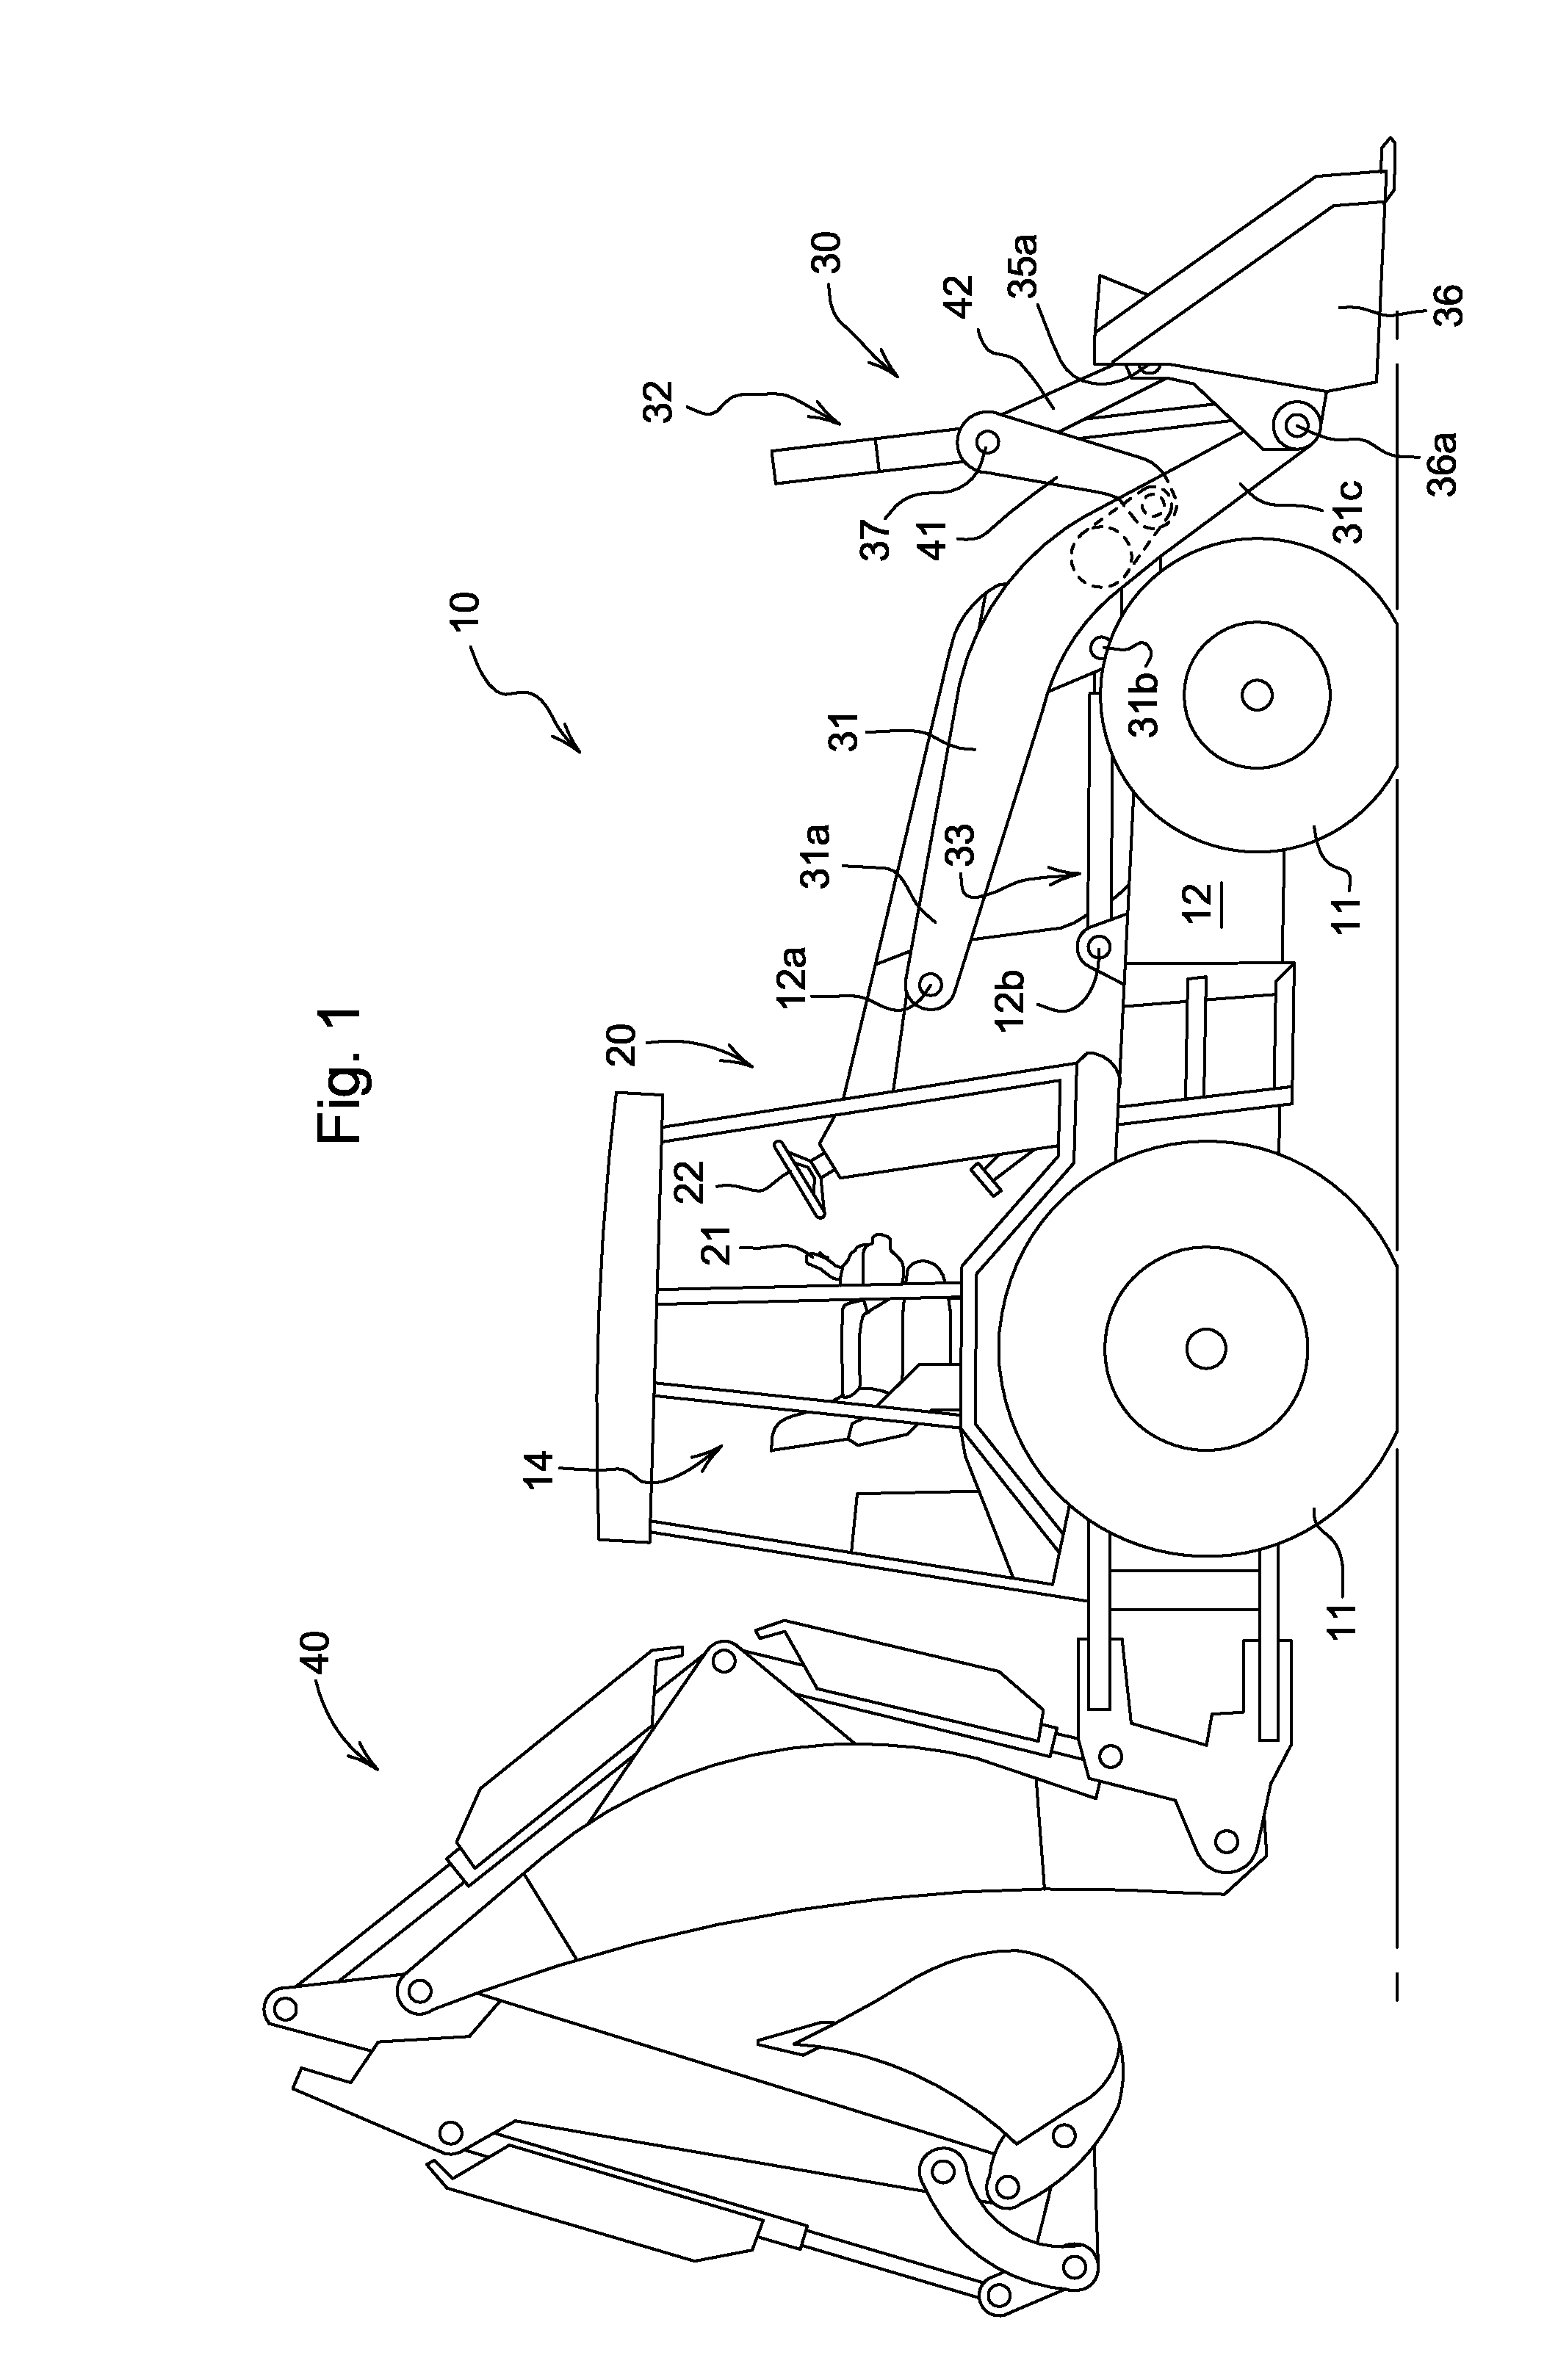 Electronic Parallel Lift And Return To Carry On A Backhoe Loader